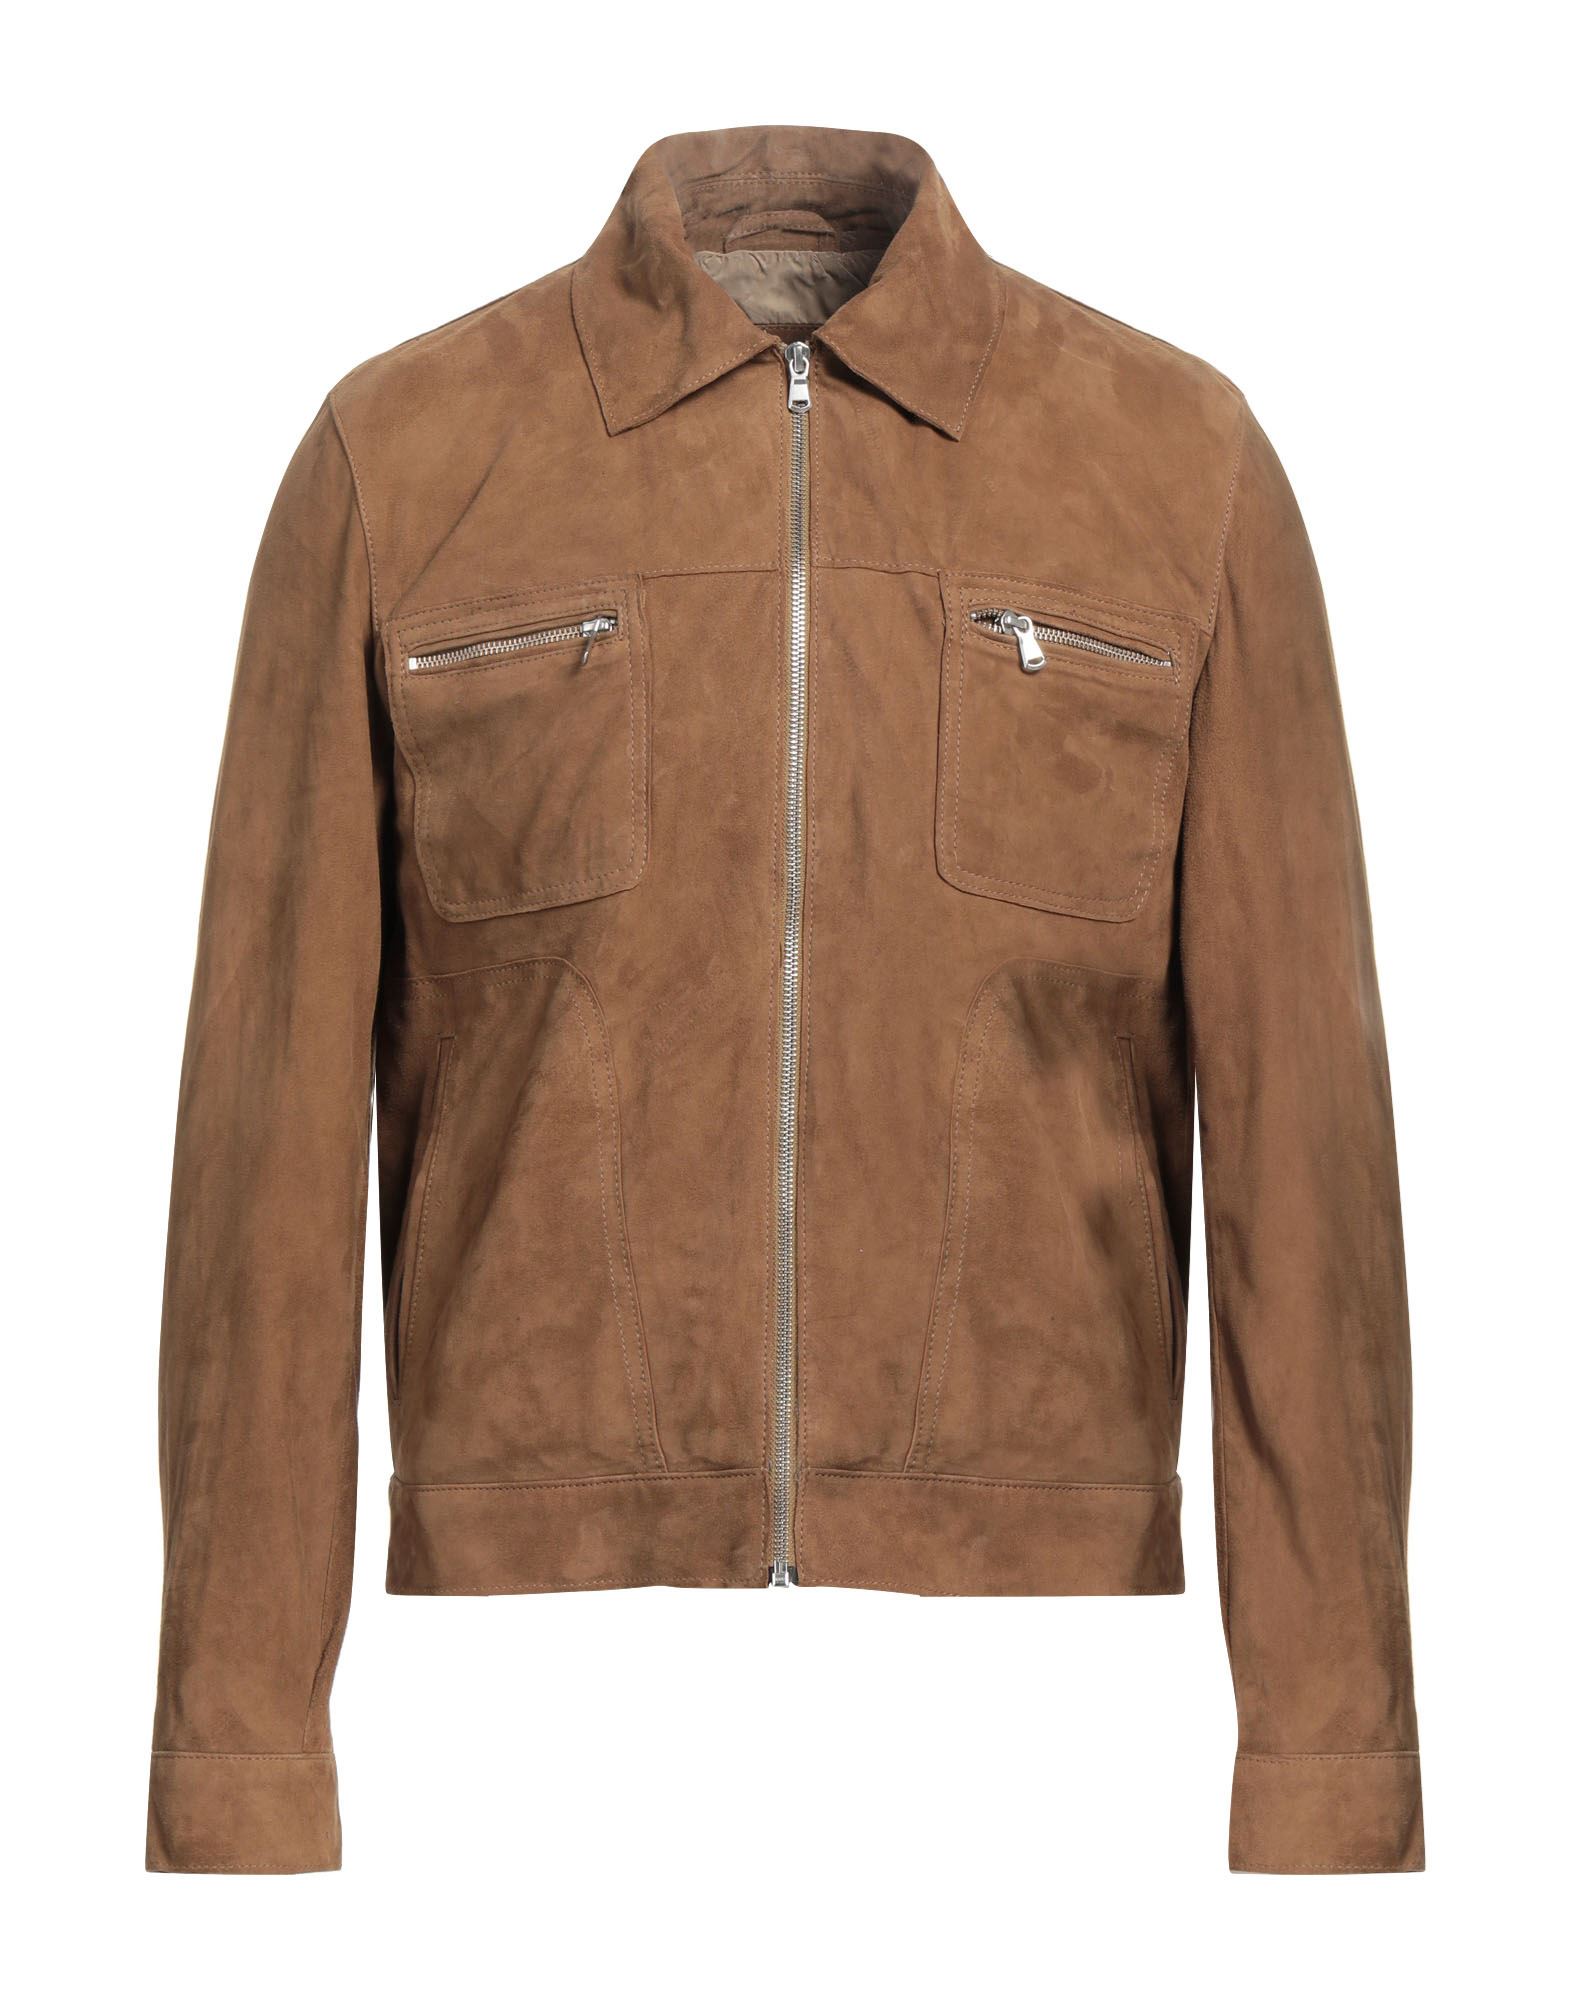 Andrea D'amico Man Jacket Camel Size 48 Soft Leather In Beige